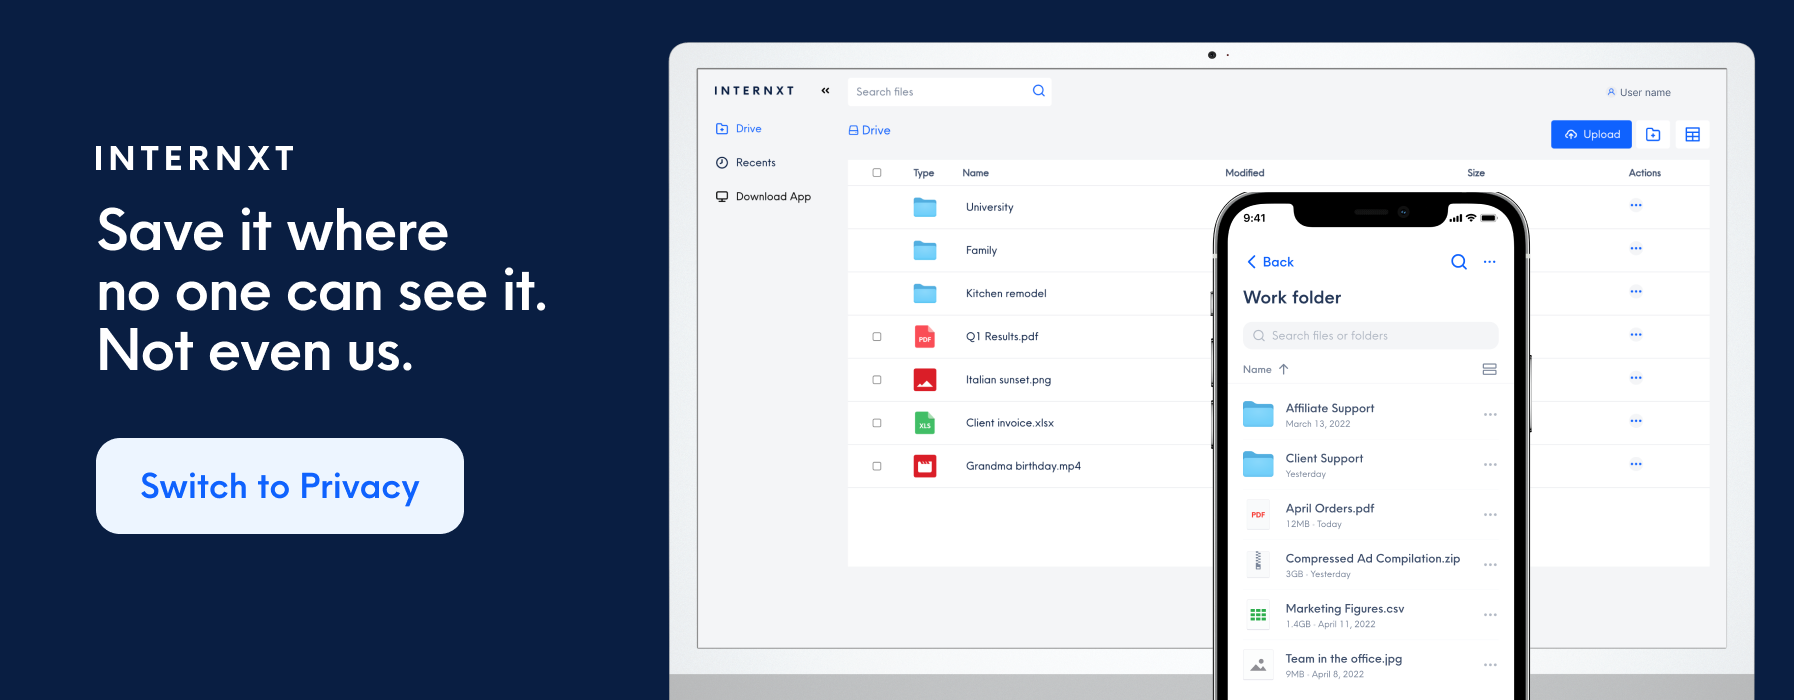 Internxt is a secure and encrypted cloud storage service